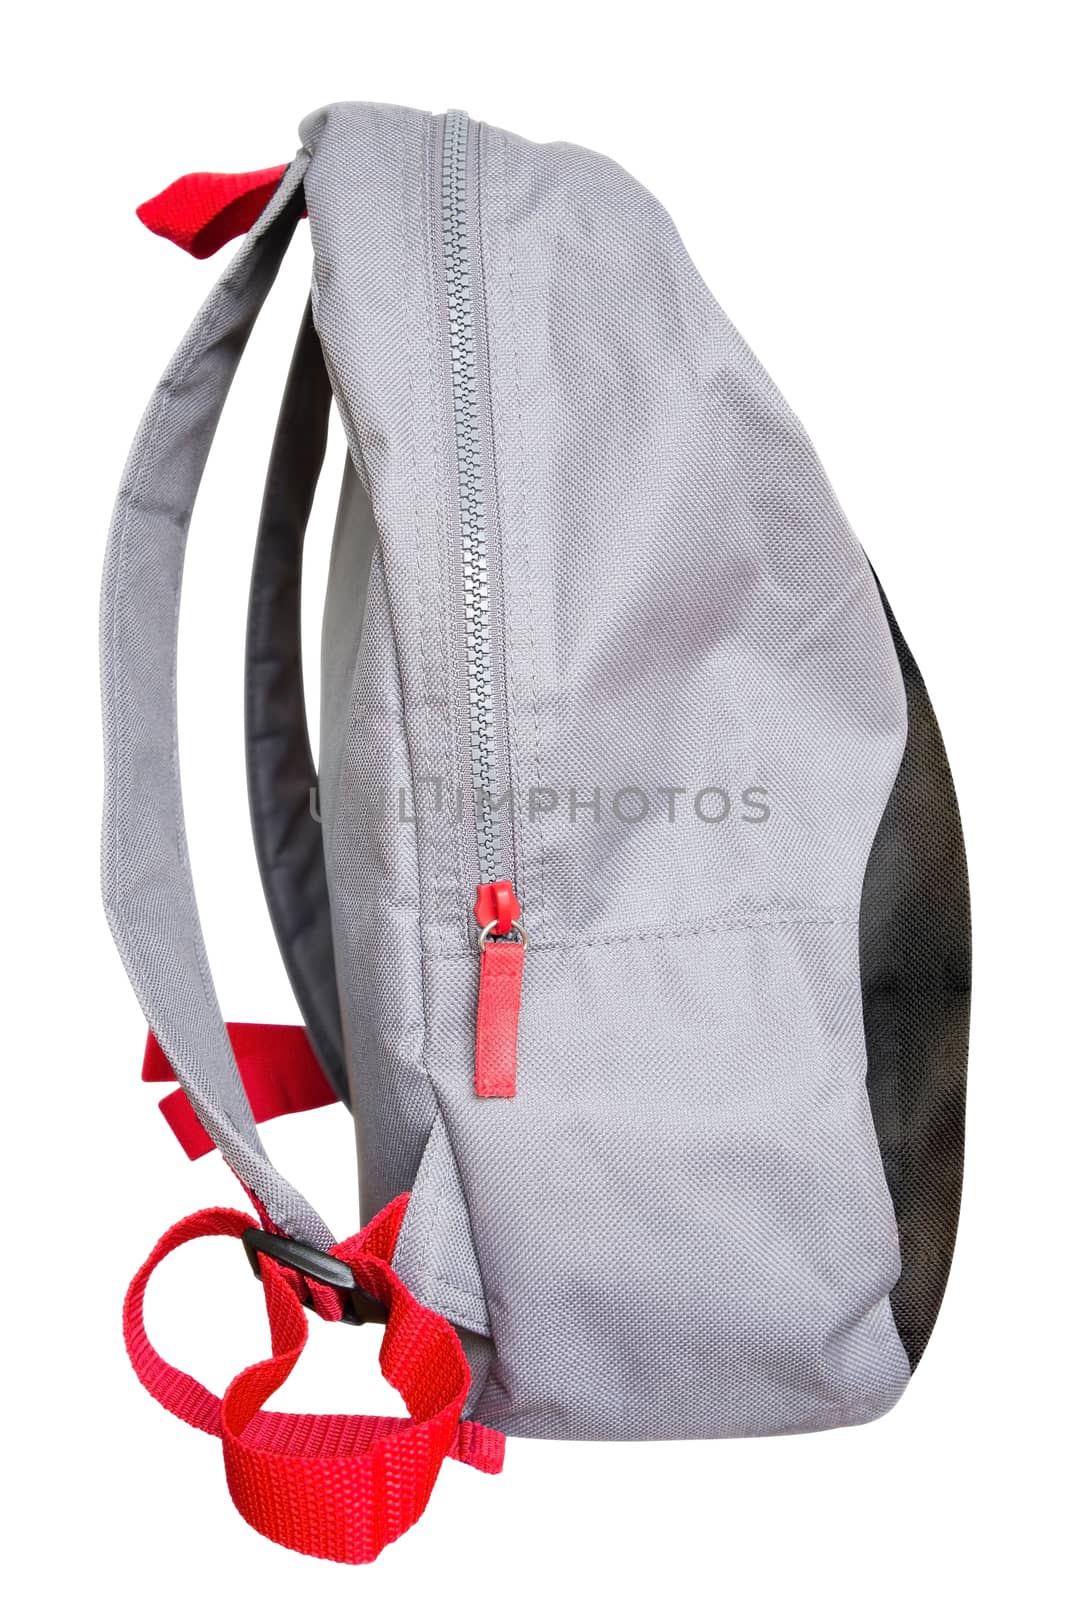 Tourist backpack isolated on white. Clipping path included.